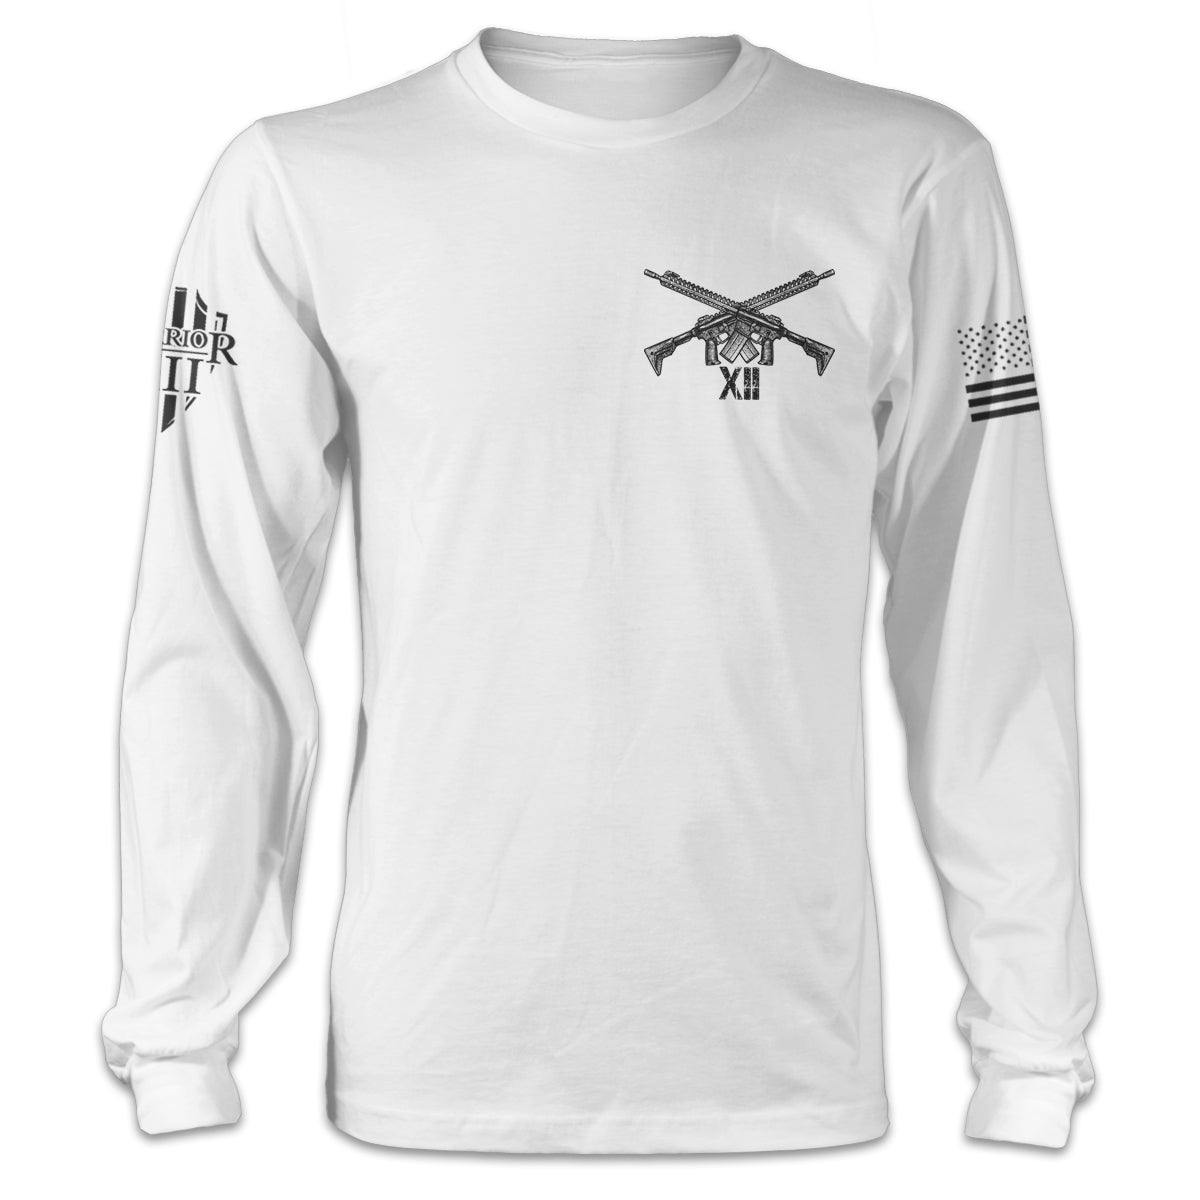 A white long sleeve shirt with two guns crossed over printed on the front of the shirt.